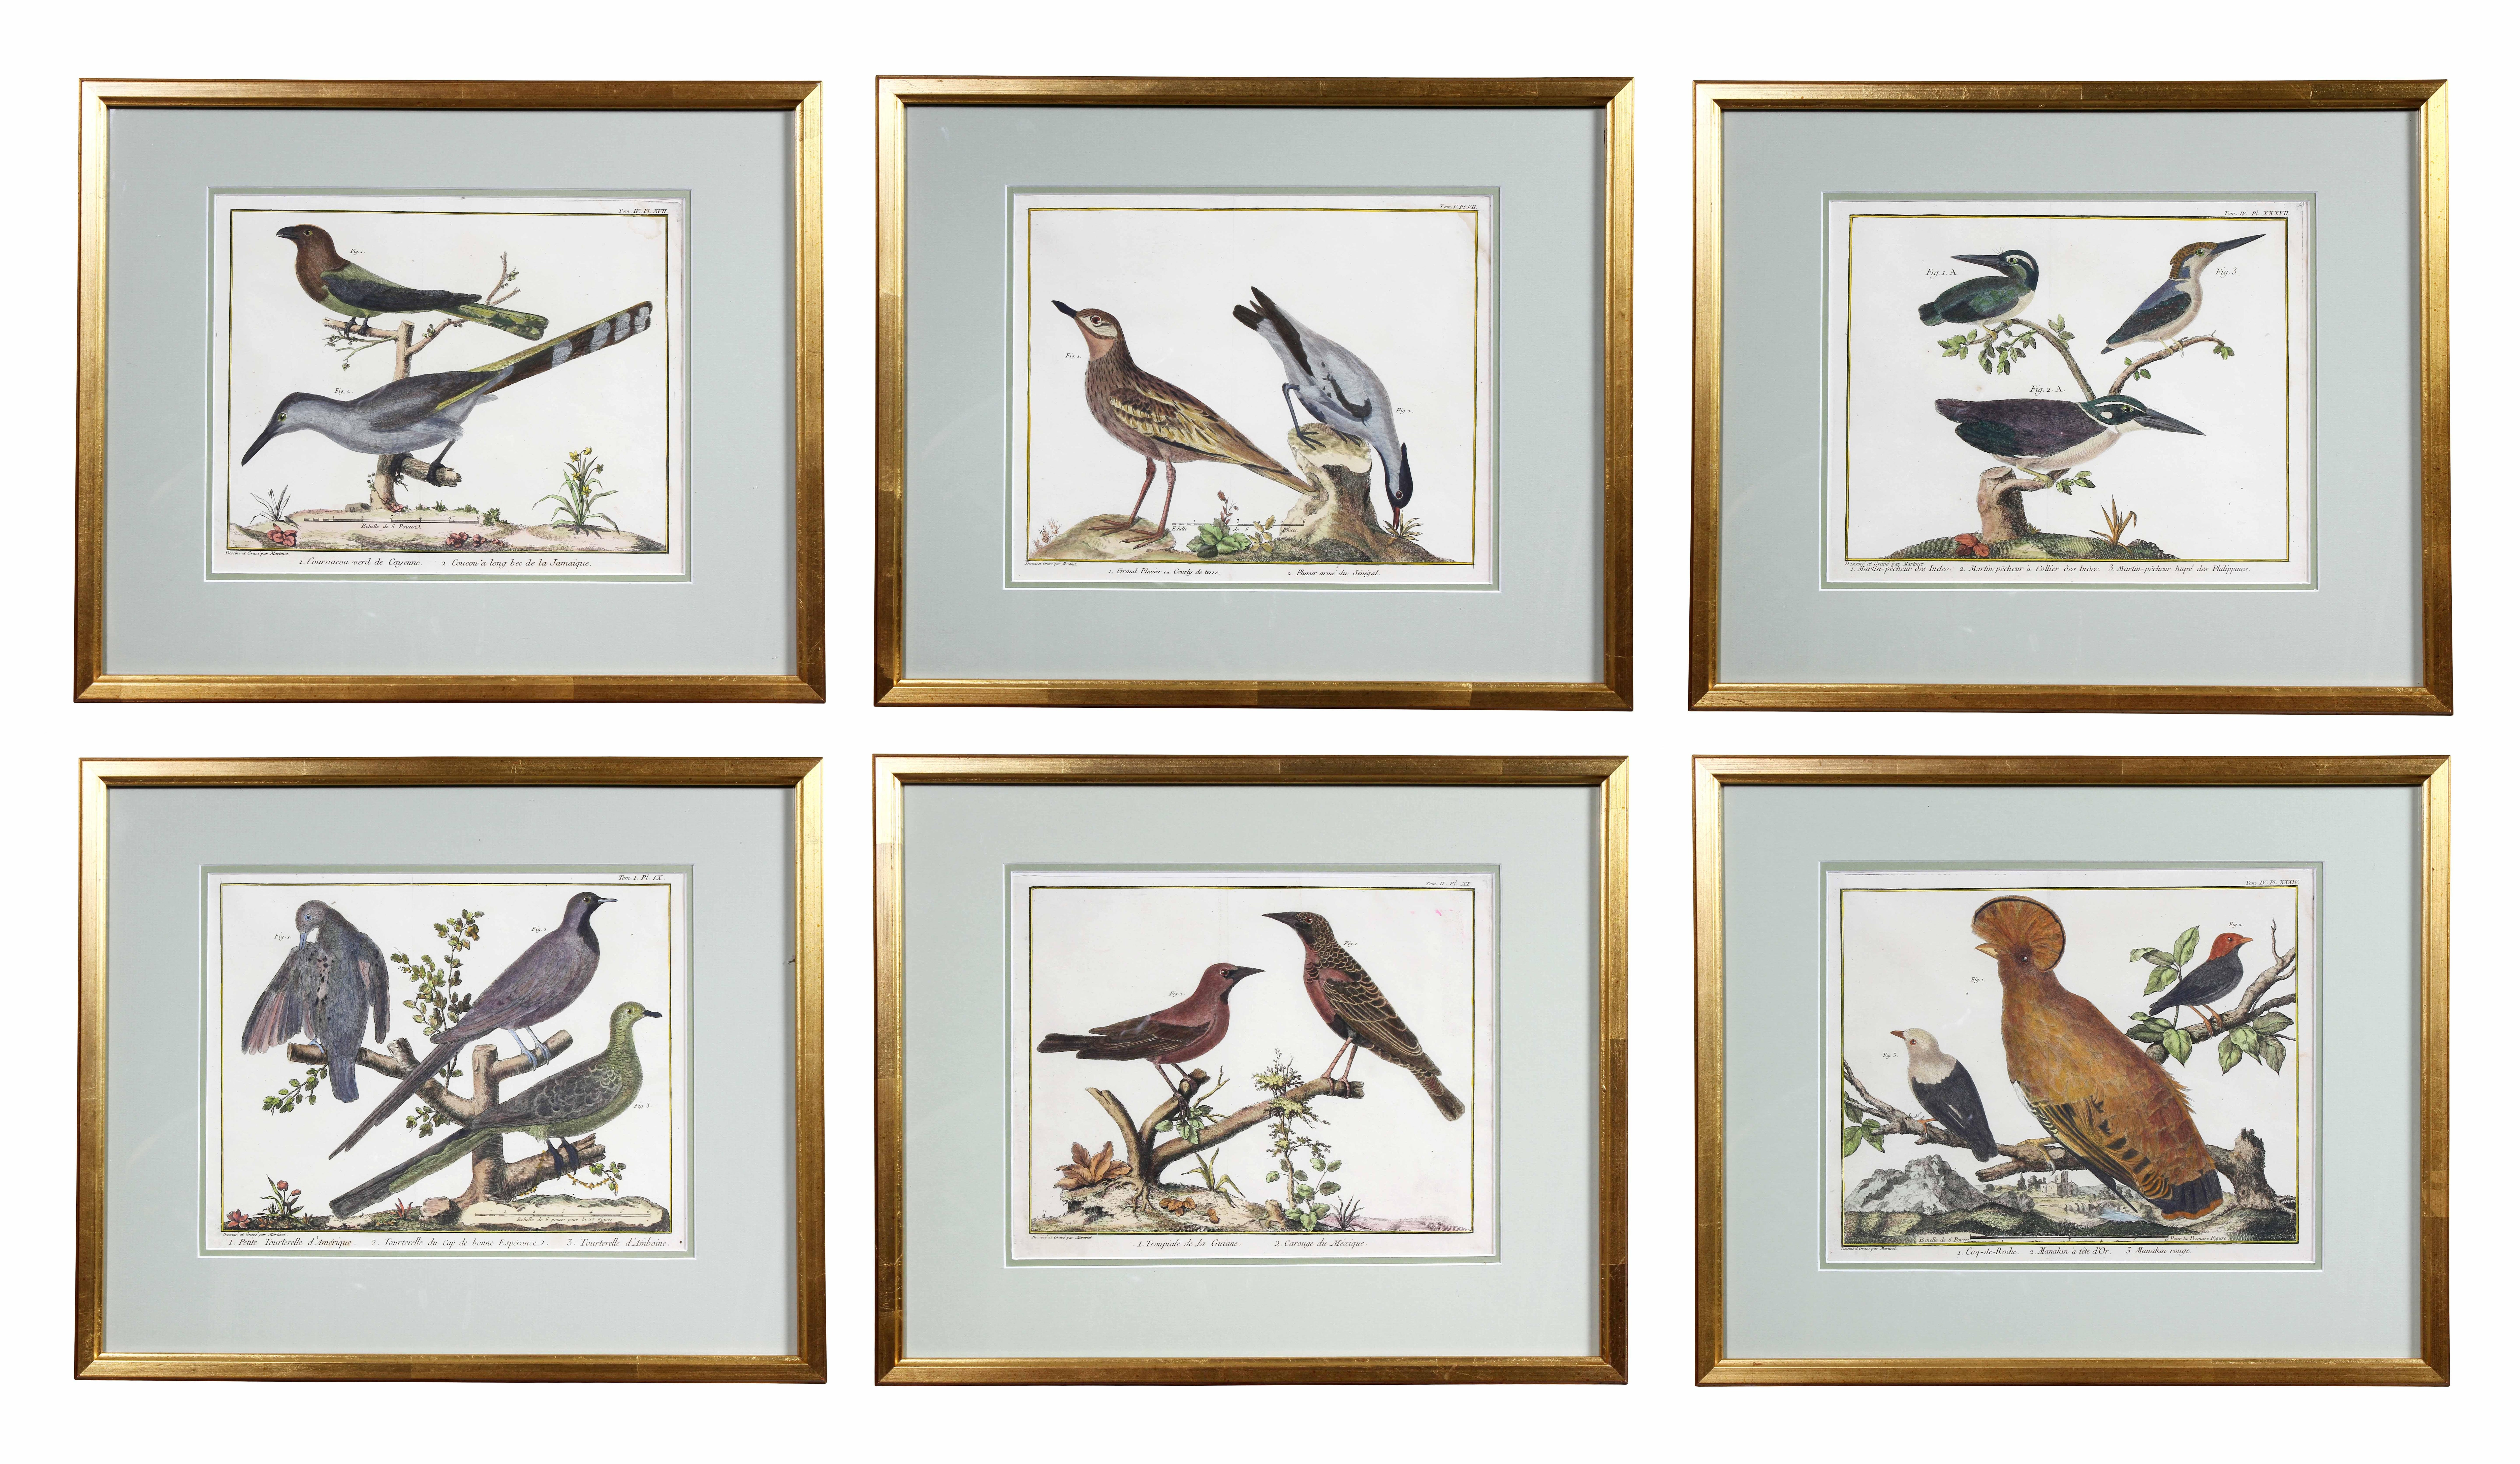 Each are in newly matted giltwood frames with archival paper. Hand colored.